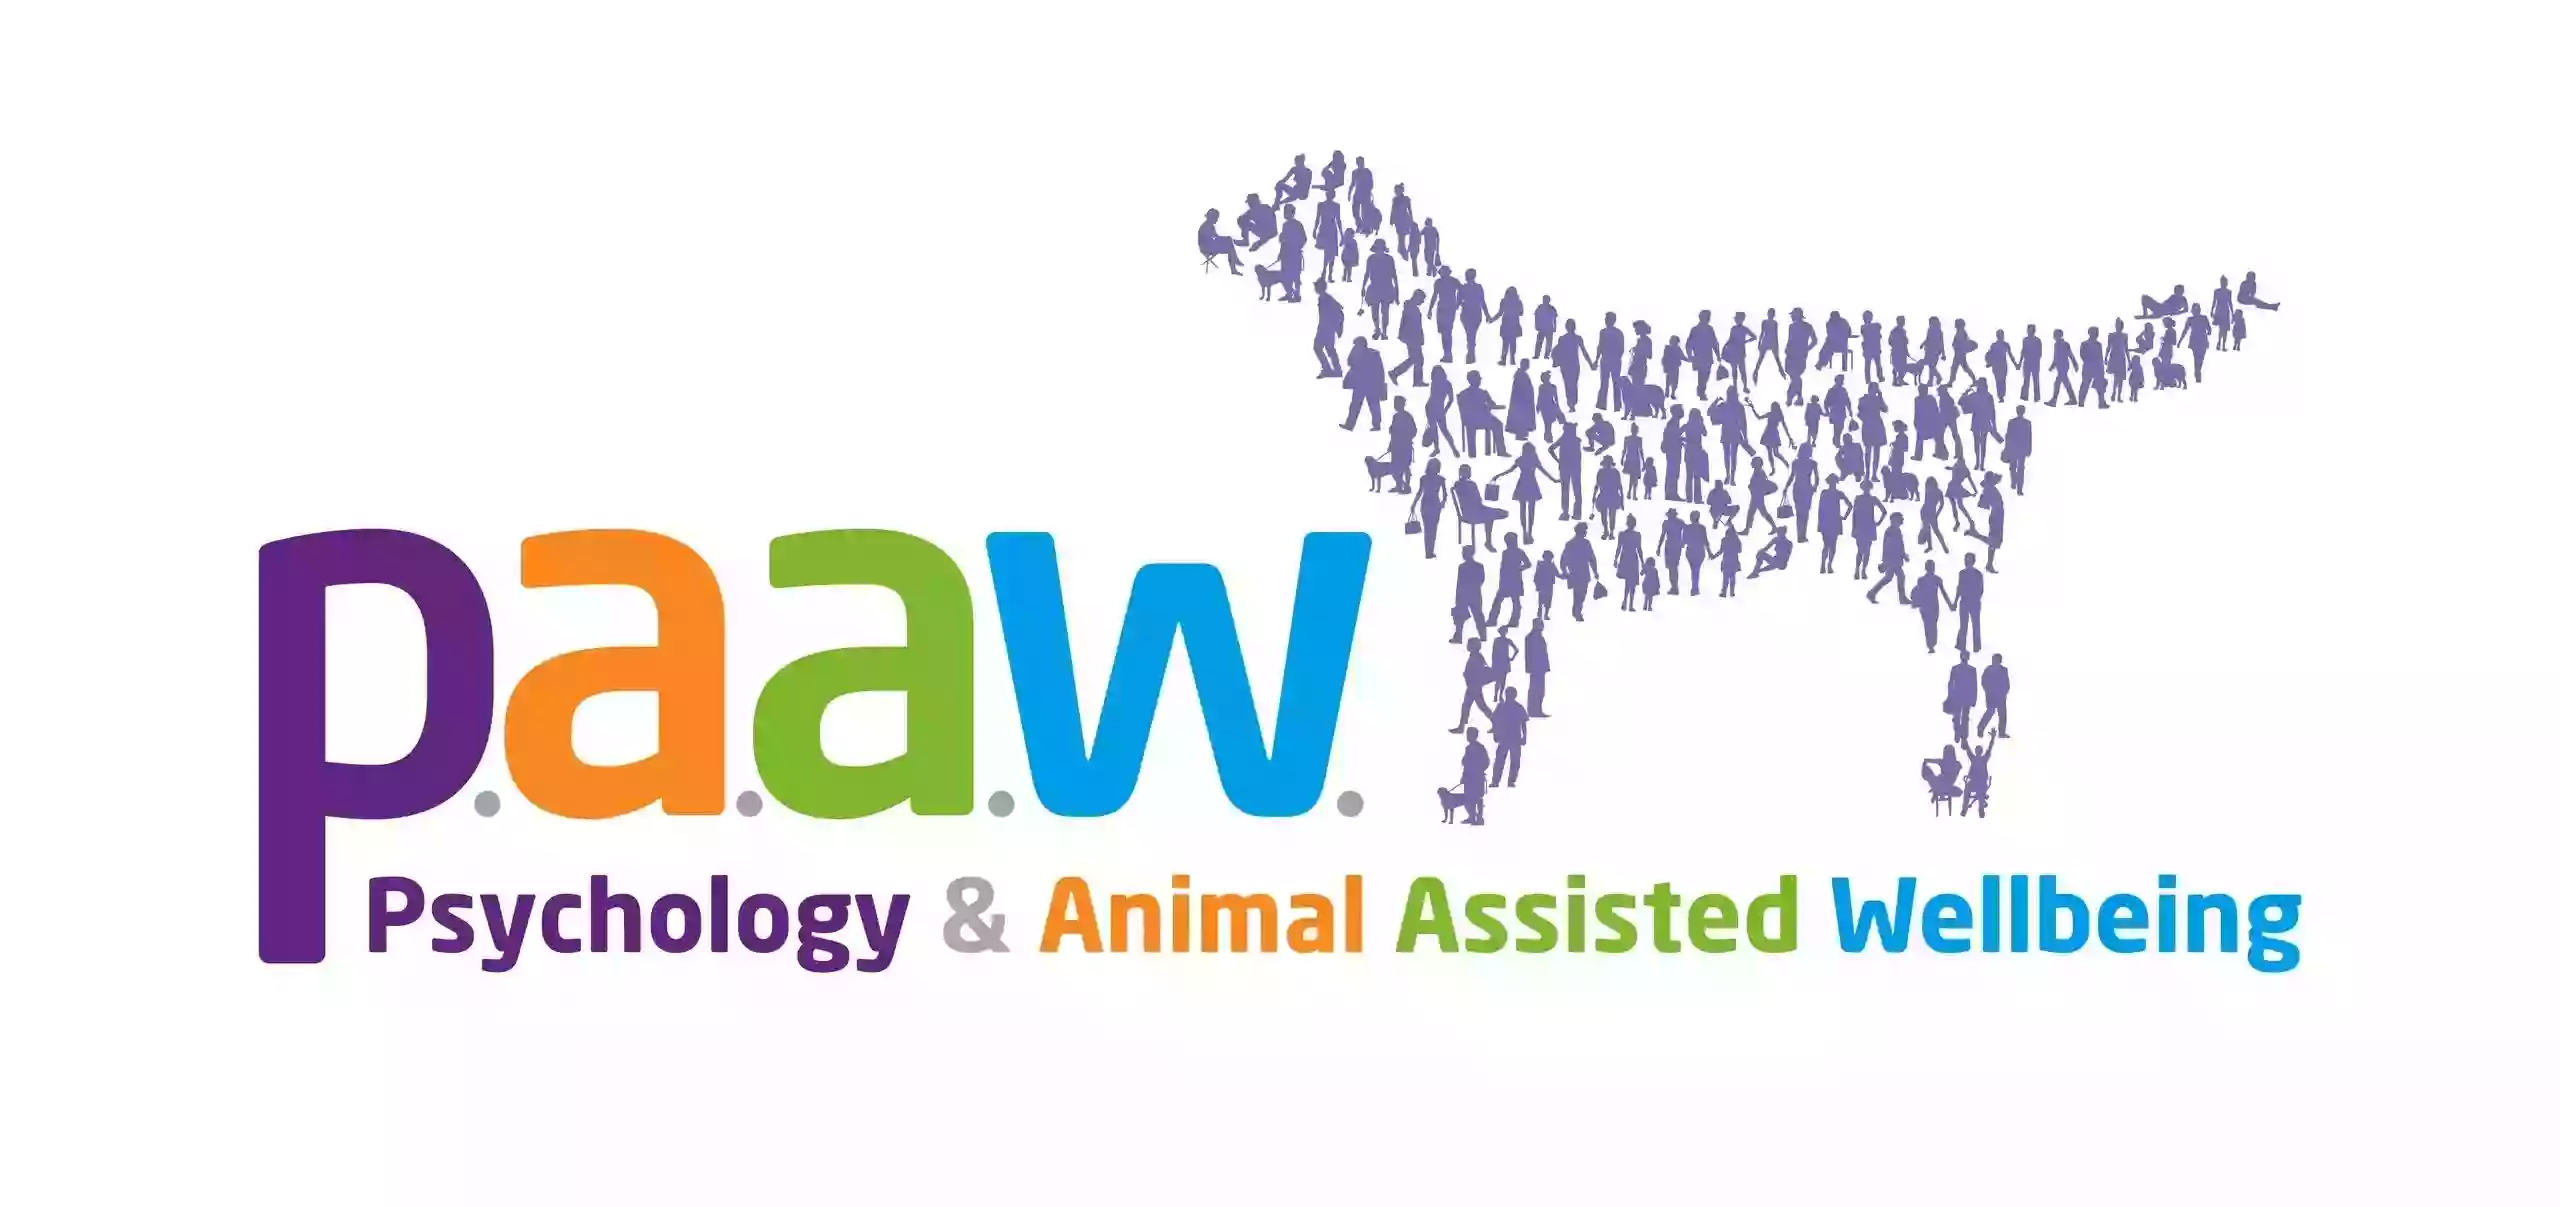 Psychology & Animal Assisted Wellbeing (PAAW)